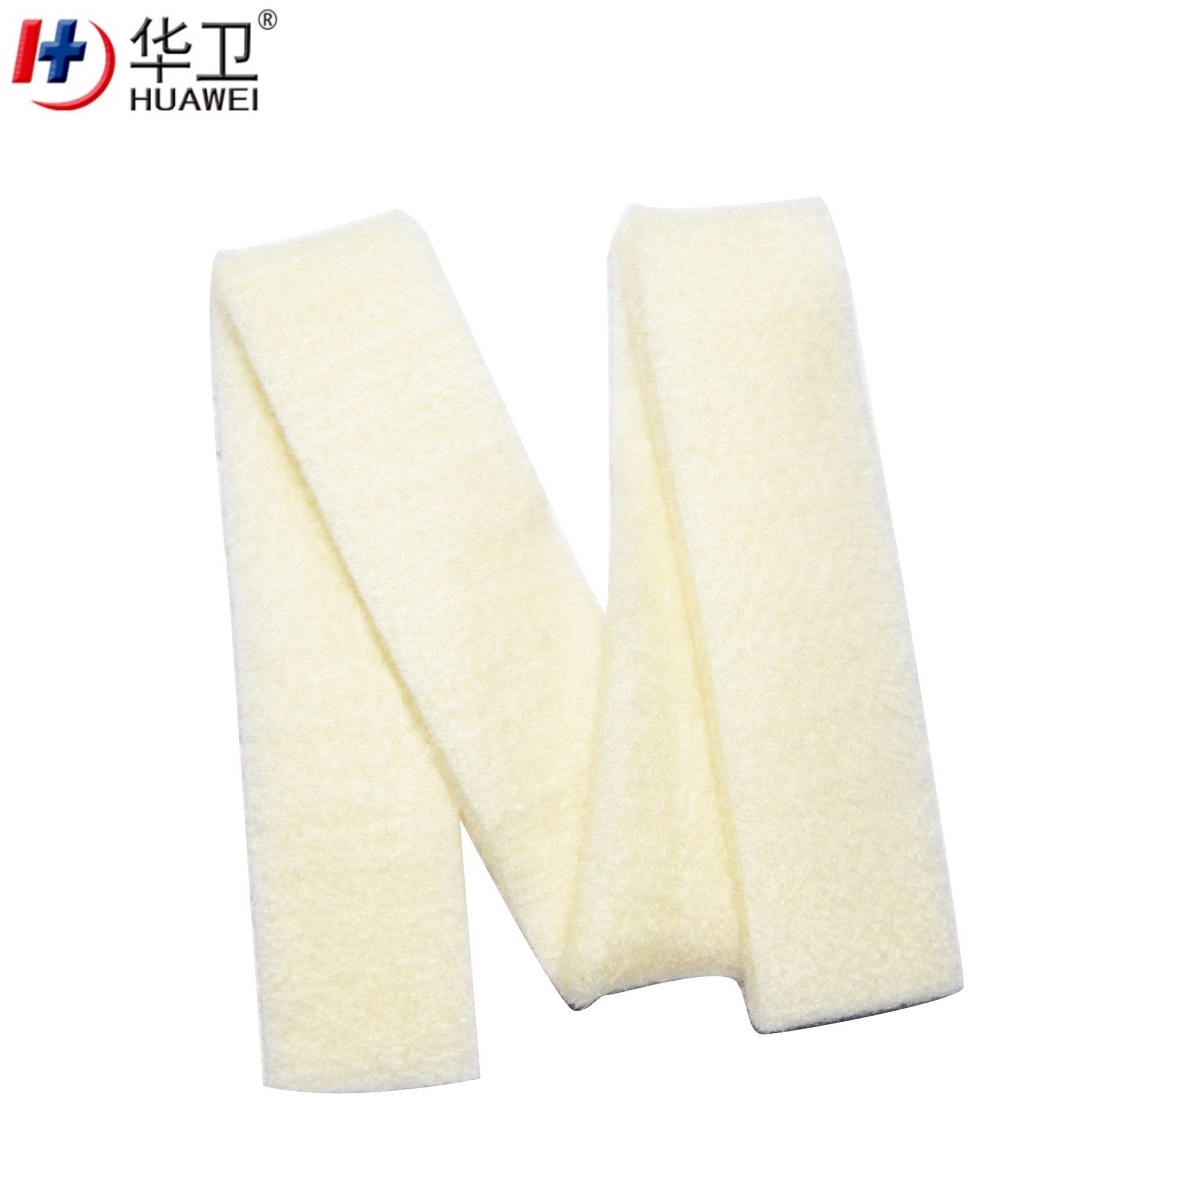 Huawei medical patch company for surgery-2